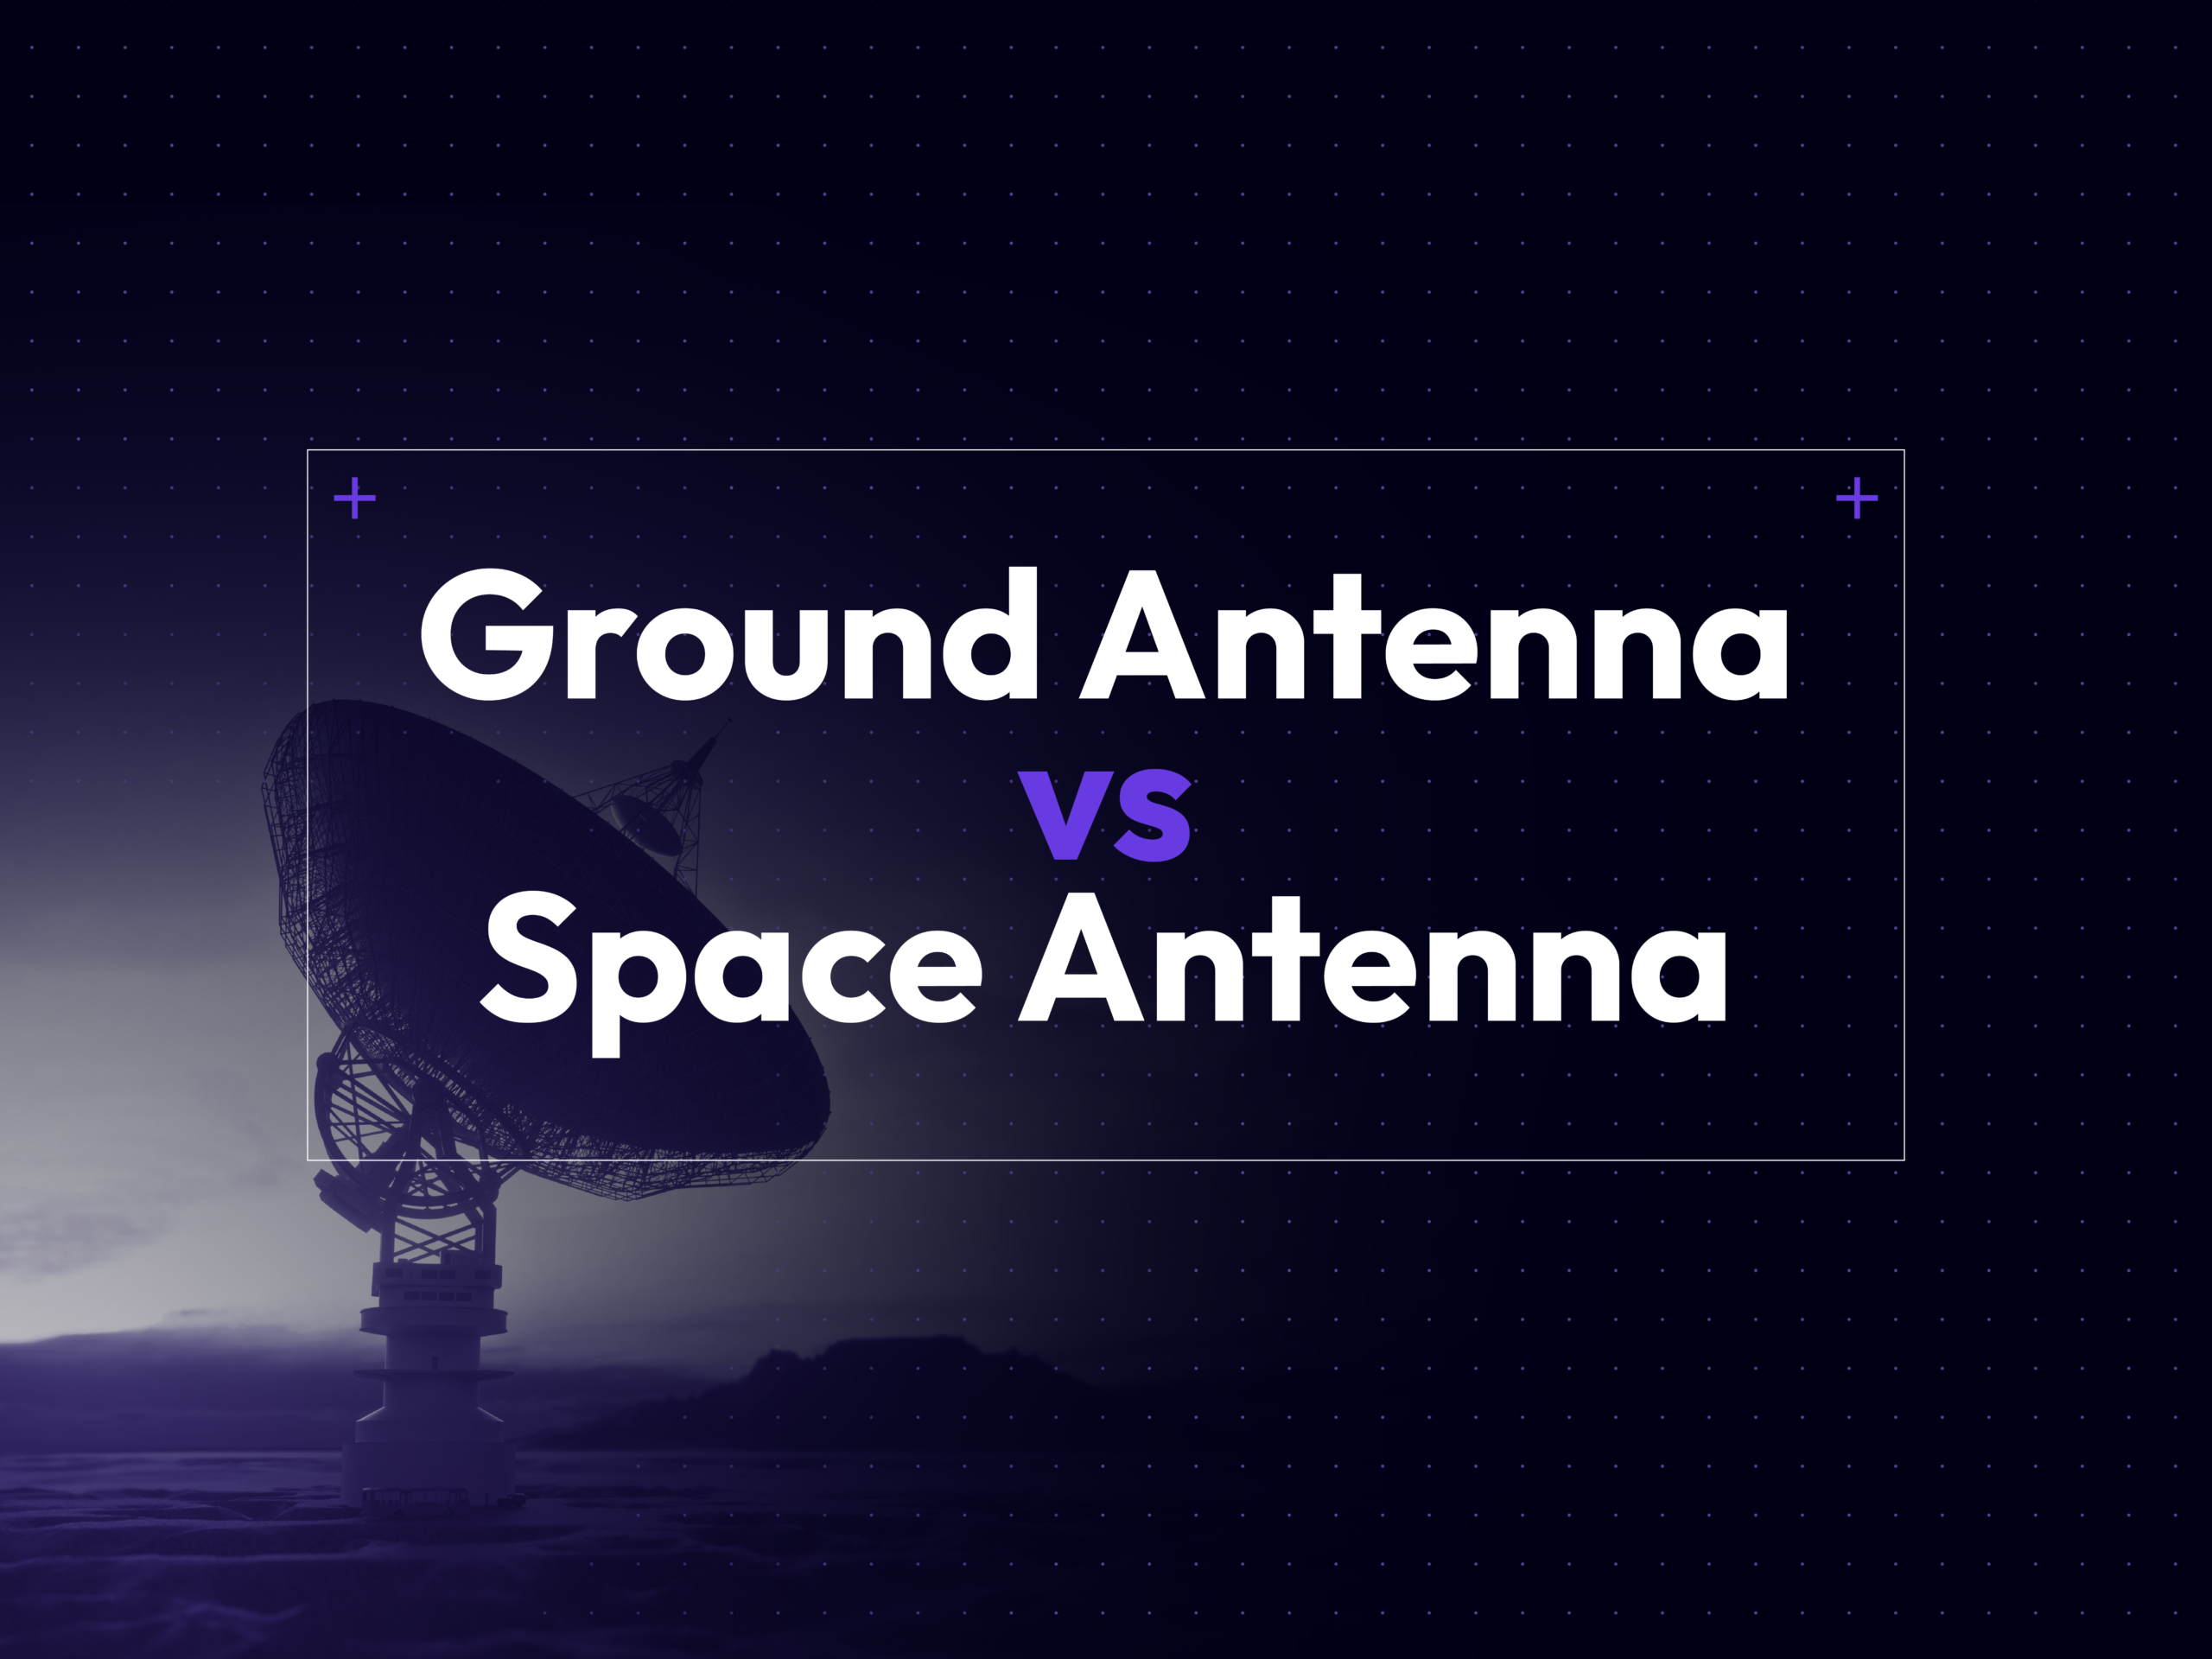 what's the difference between Ground Antennas and Space Antennas